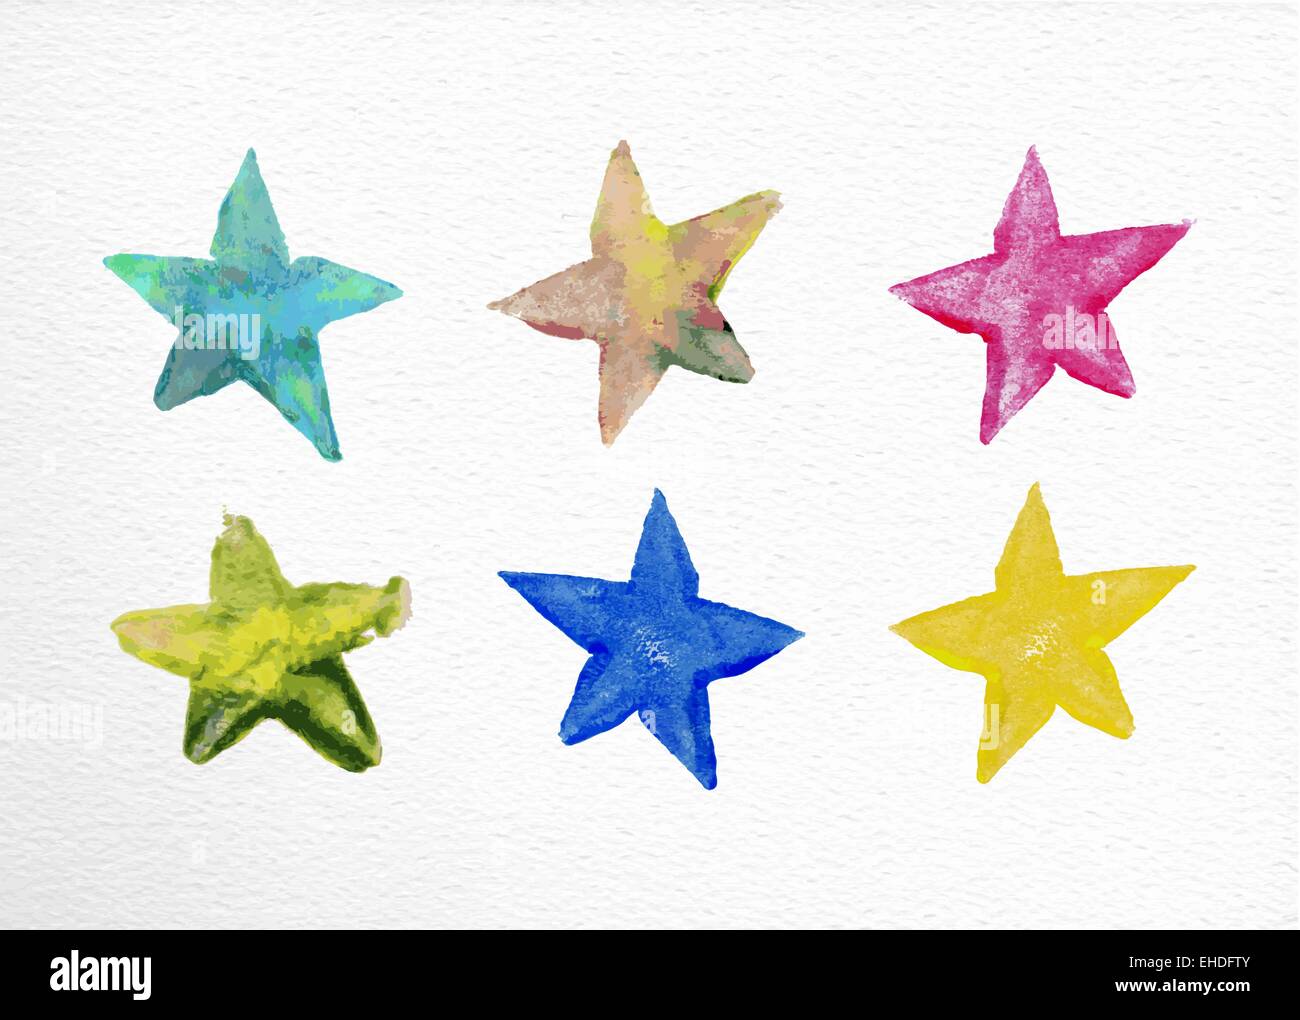 Set of watercolor stars elements hand drawn illustration. EPS10 vector file organized in layers for easy editing. Stock Vector